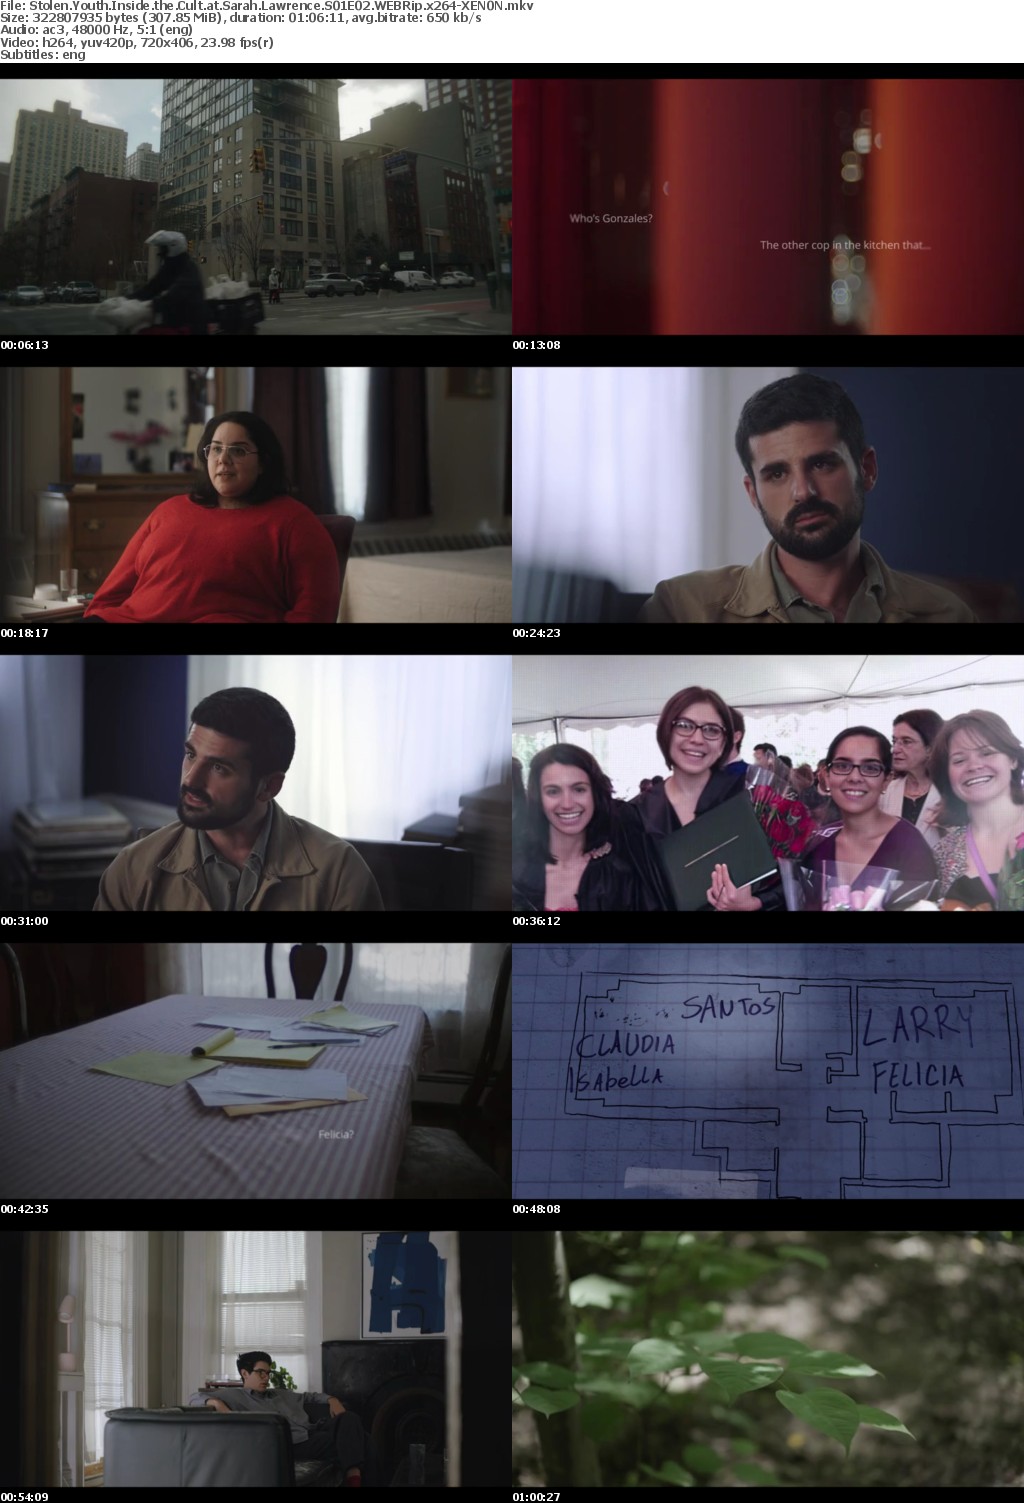 Stolen Youth Inside the Cult at Sarah Lawrence S01E02 WEBRip x264-XEN0N